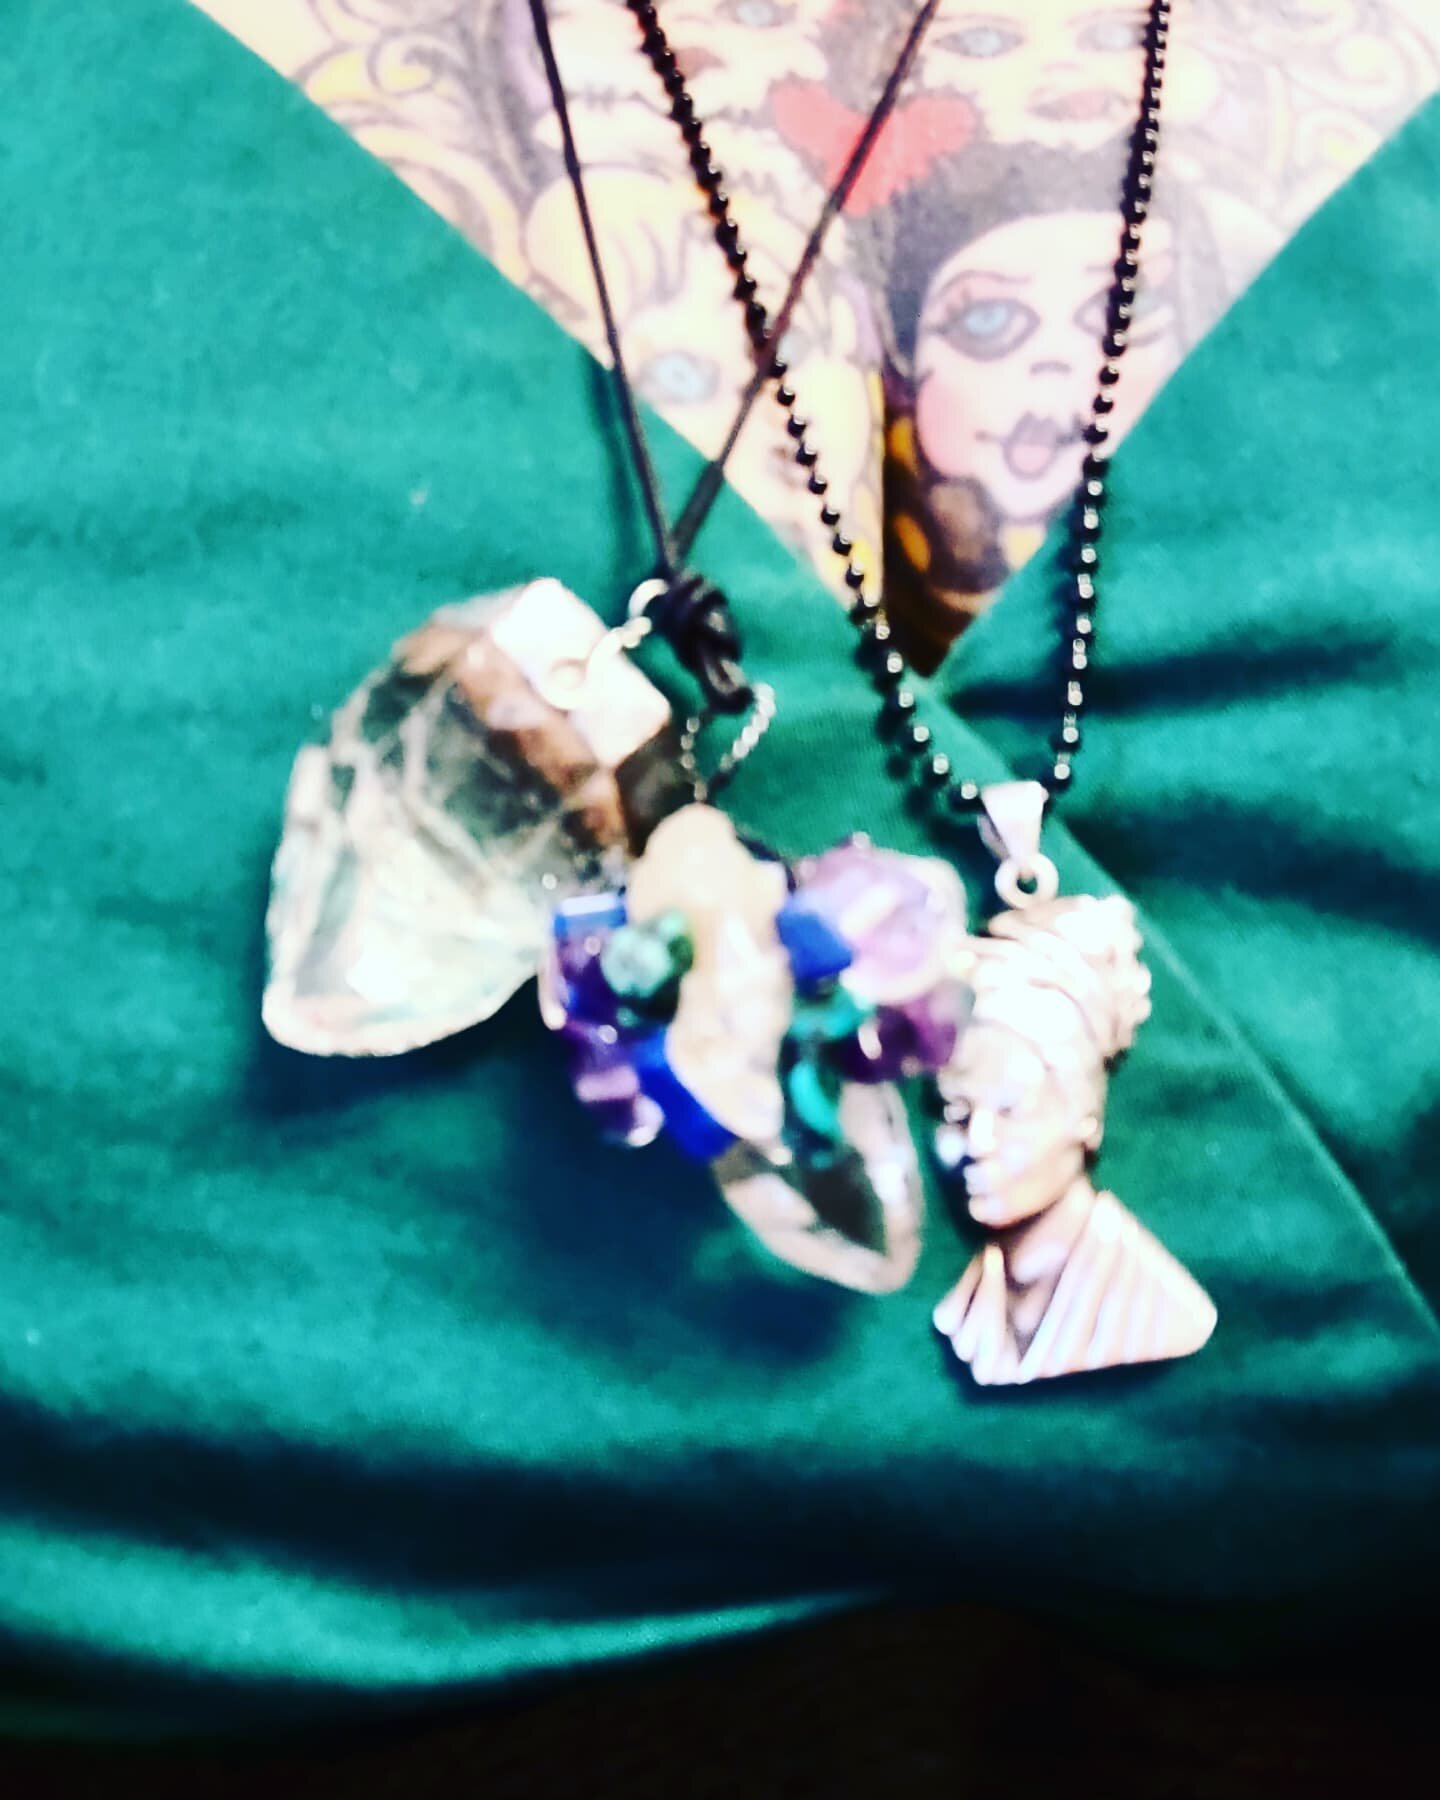 Been wearing my mama's crystals through Yule season, I remember when she bought these at Gemini Metaphysical Store in Morgan Hill around 1988..
🐝🦋🐝🦋
Wearing green for luck (phukit I'm Irish) and I never remove my Laveau for I feel she protects me